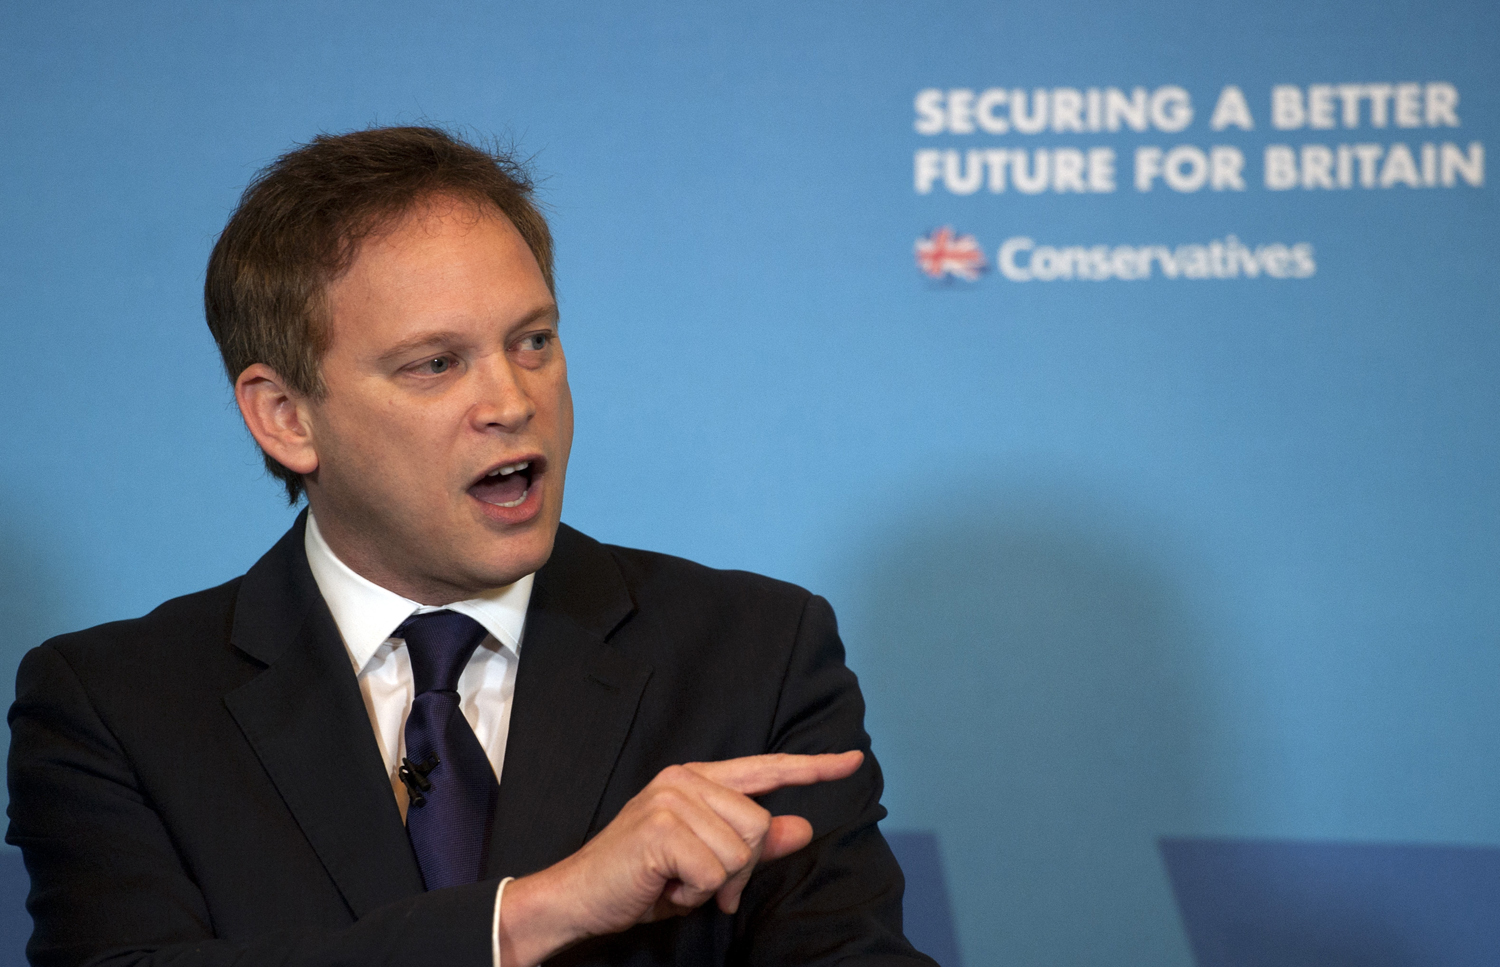 Conservative Party chairman Grant Shapps gives a speech on free trade at the Institute of Directors in London on Feb. 12, 2015 (Hannah McKay — AP)